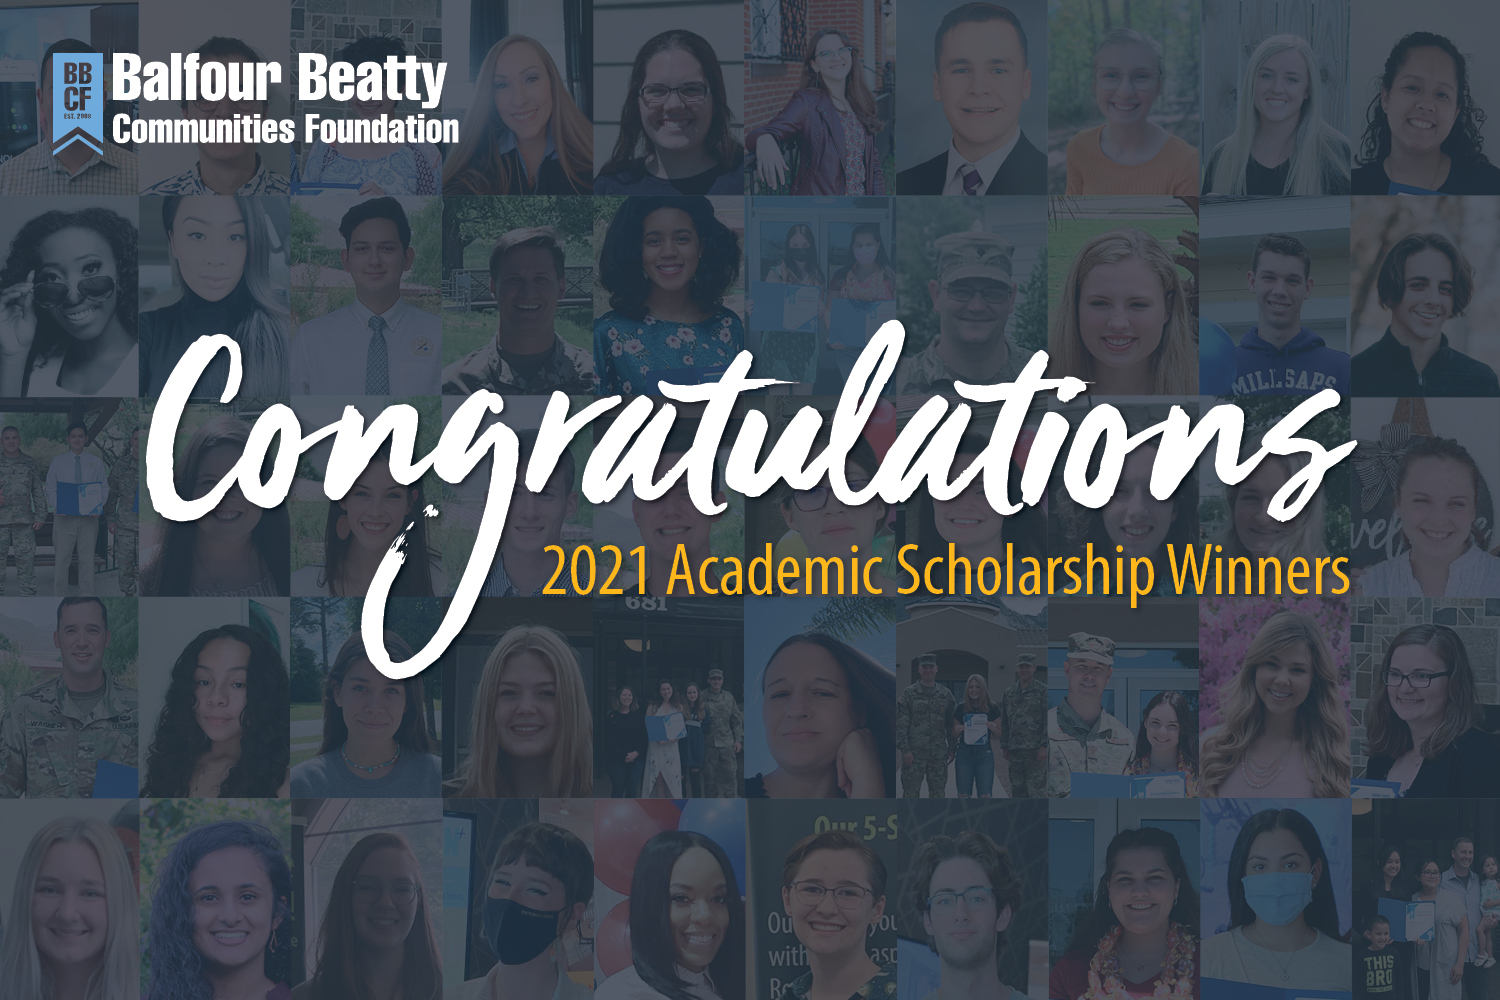 Balfour Beatty Communities Foundation Awards 64 Resident Scholarships for 2021-2022 Academic Year